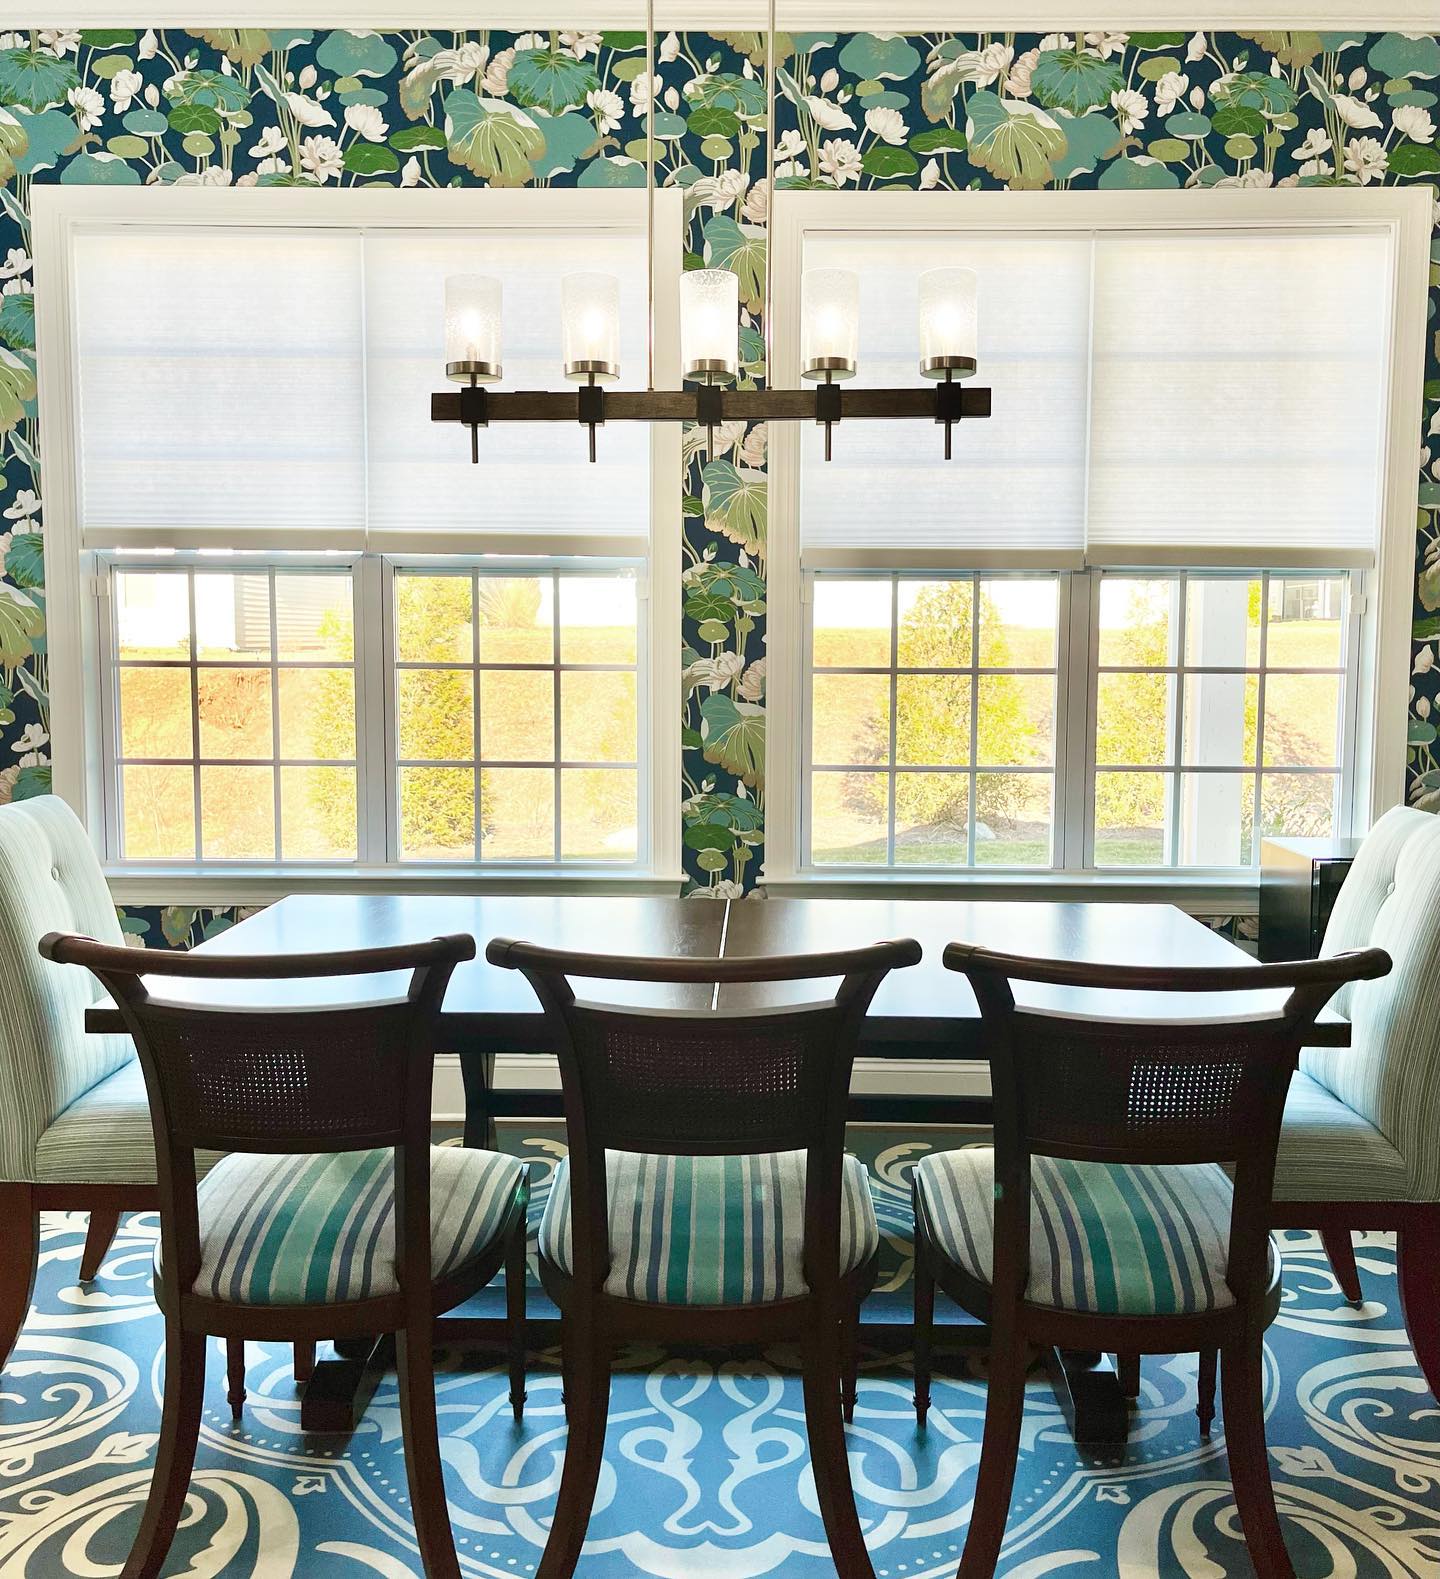 Photo showcasing a completed dining room design project by Lori Savio